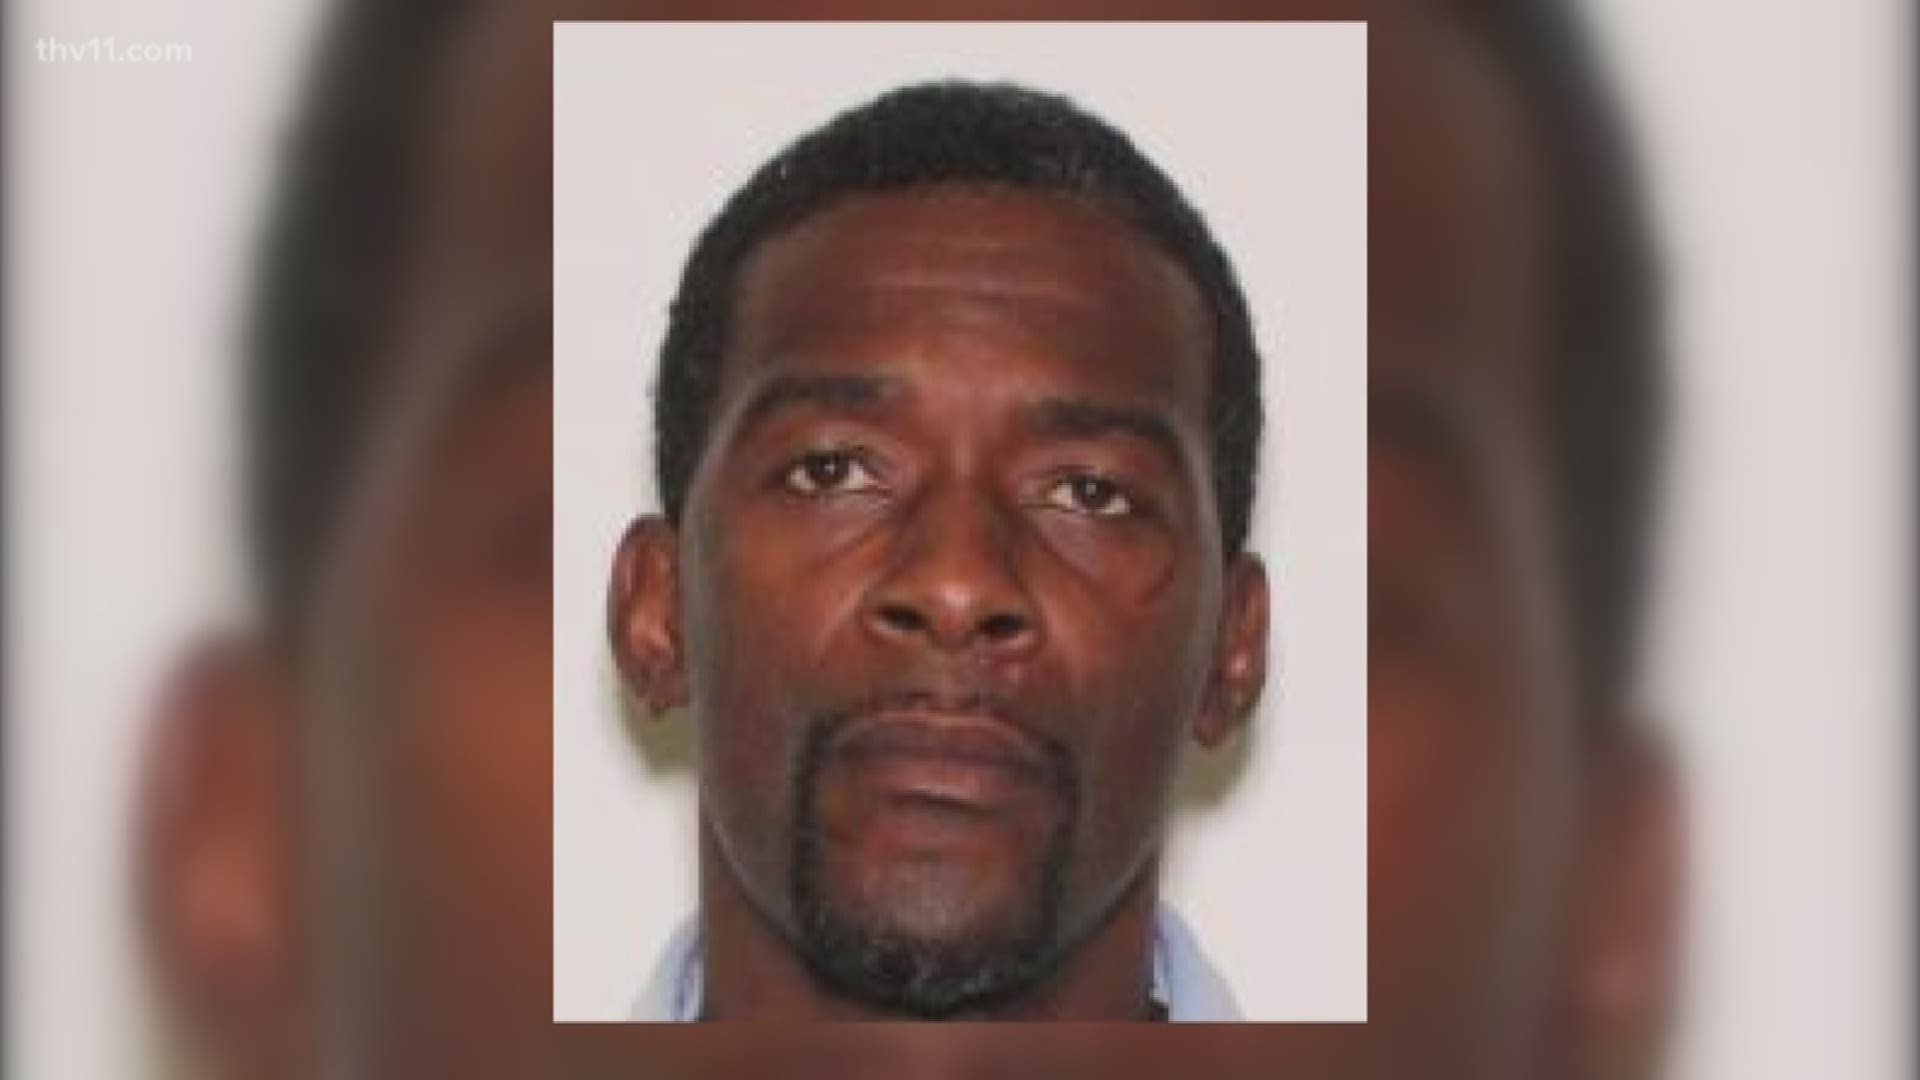 Hot Springs police are asking for the public's help in finding a man suspected of shooting and killing another man.